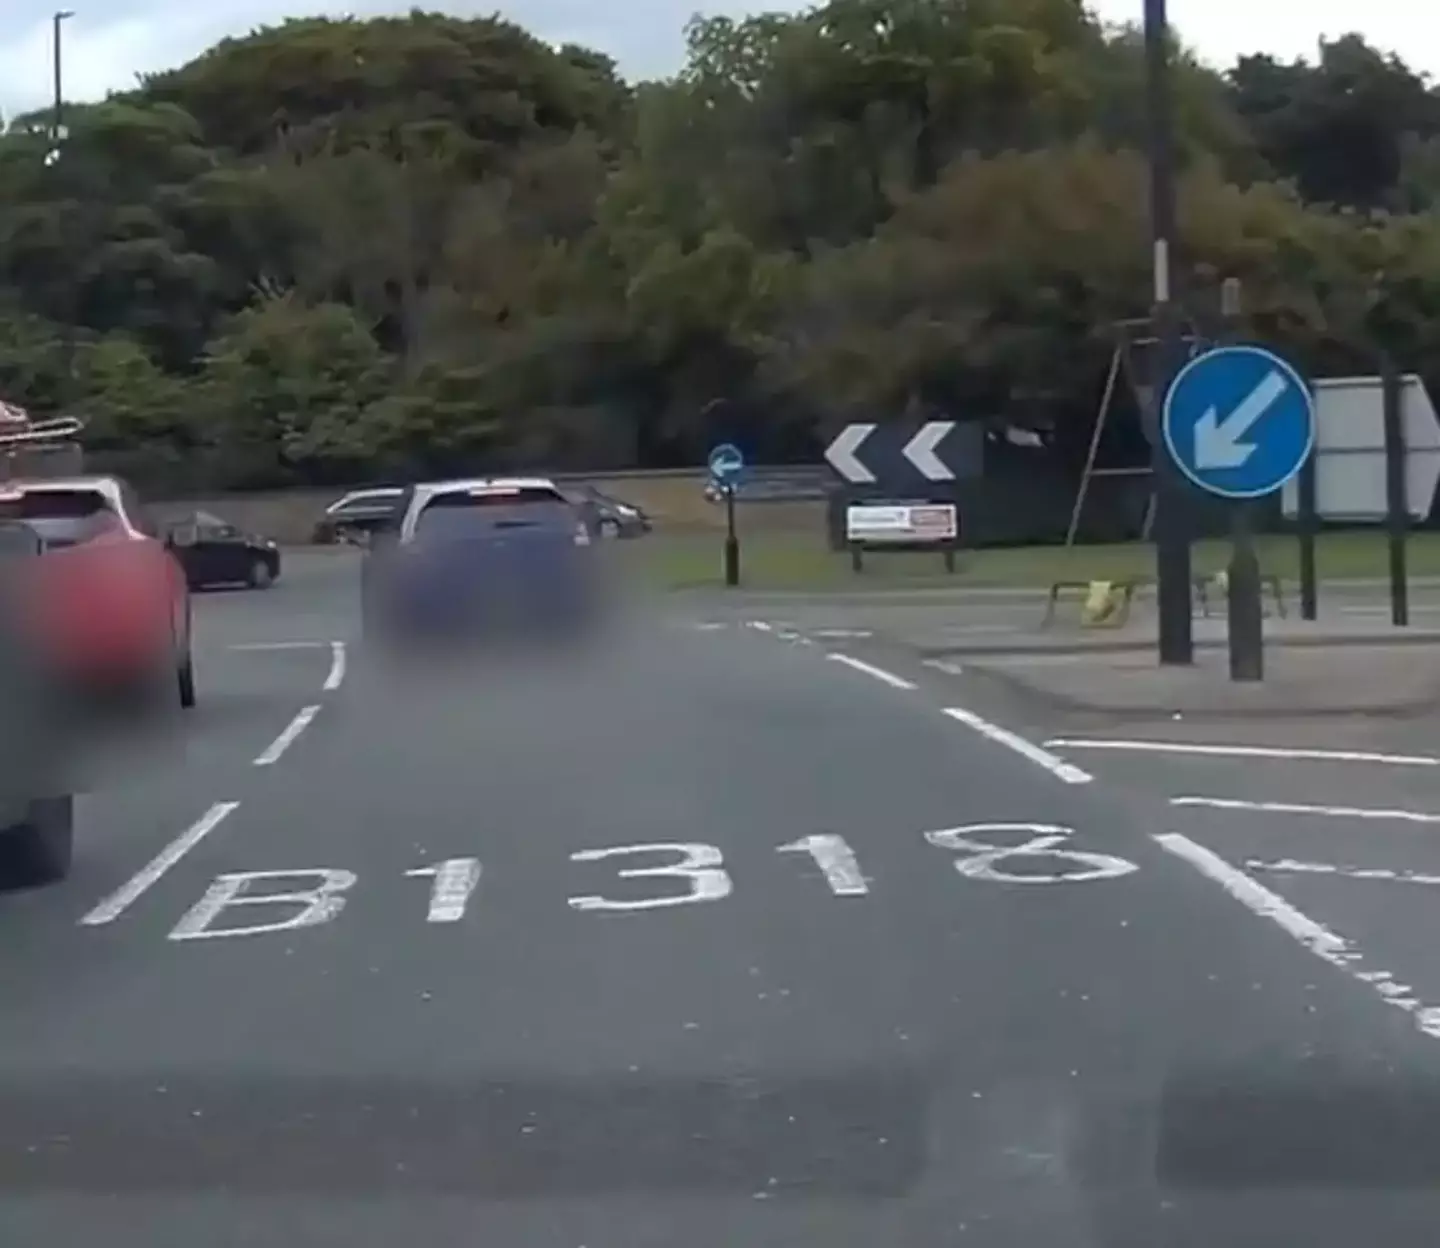 So, you just use the right lane and go around the roundabout.